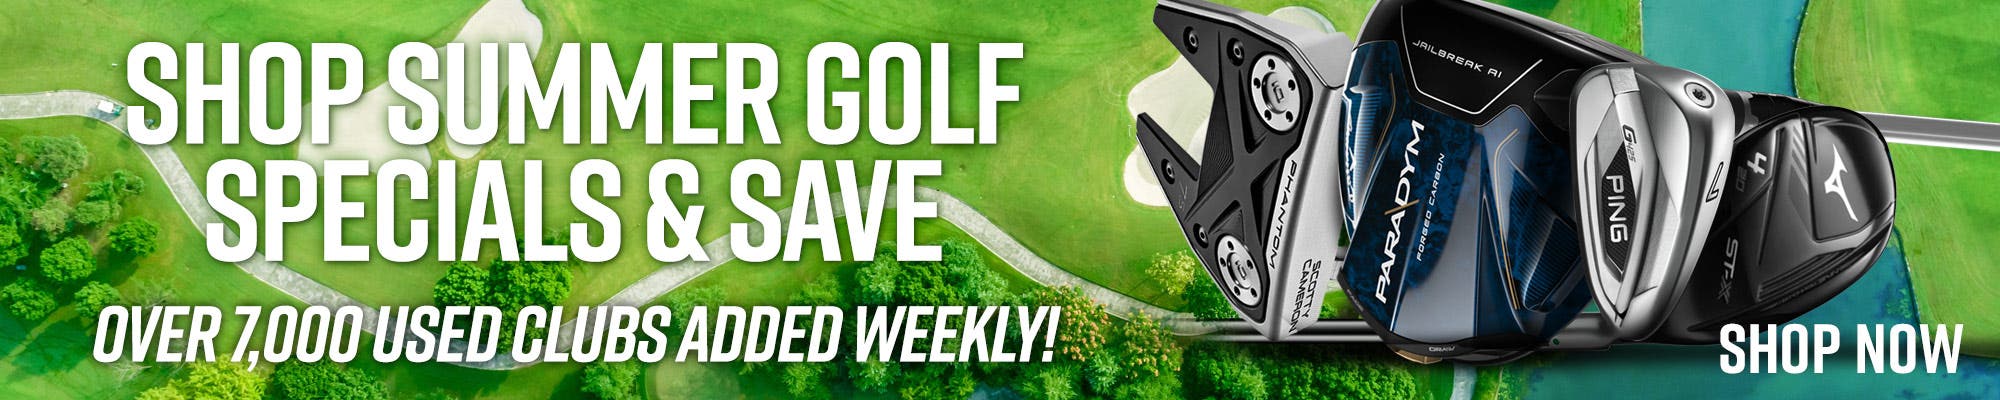 shop summer golf specials and save | over 7,000 used clubs added weekly! | shop now